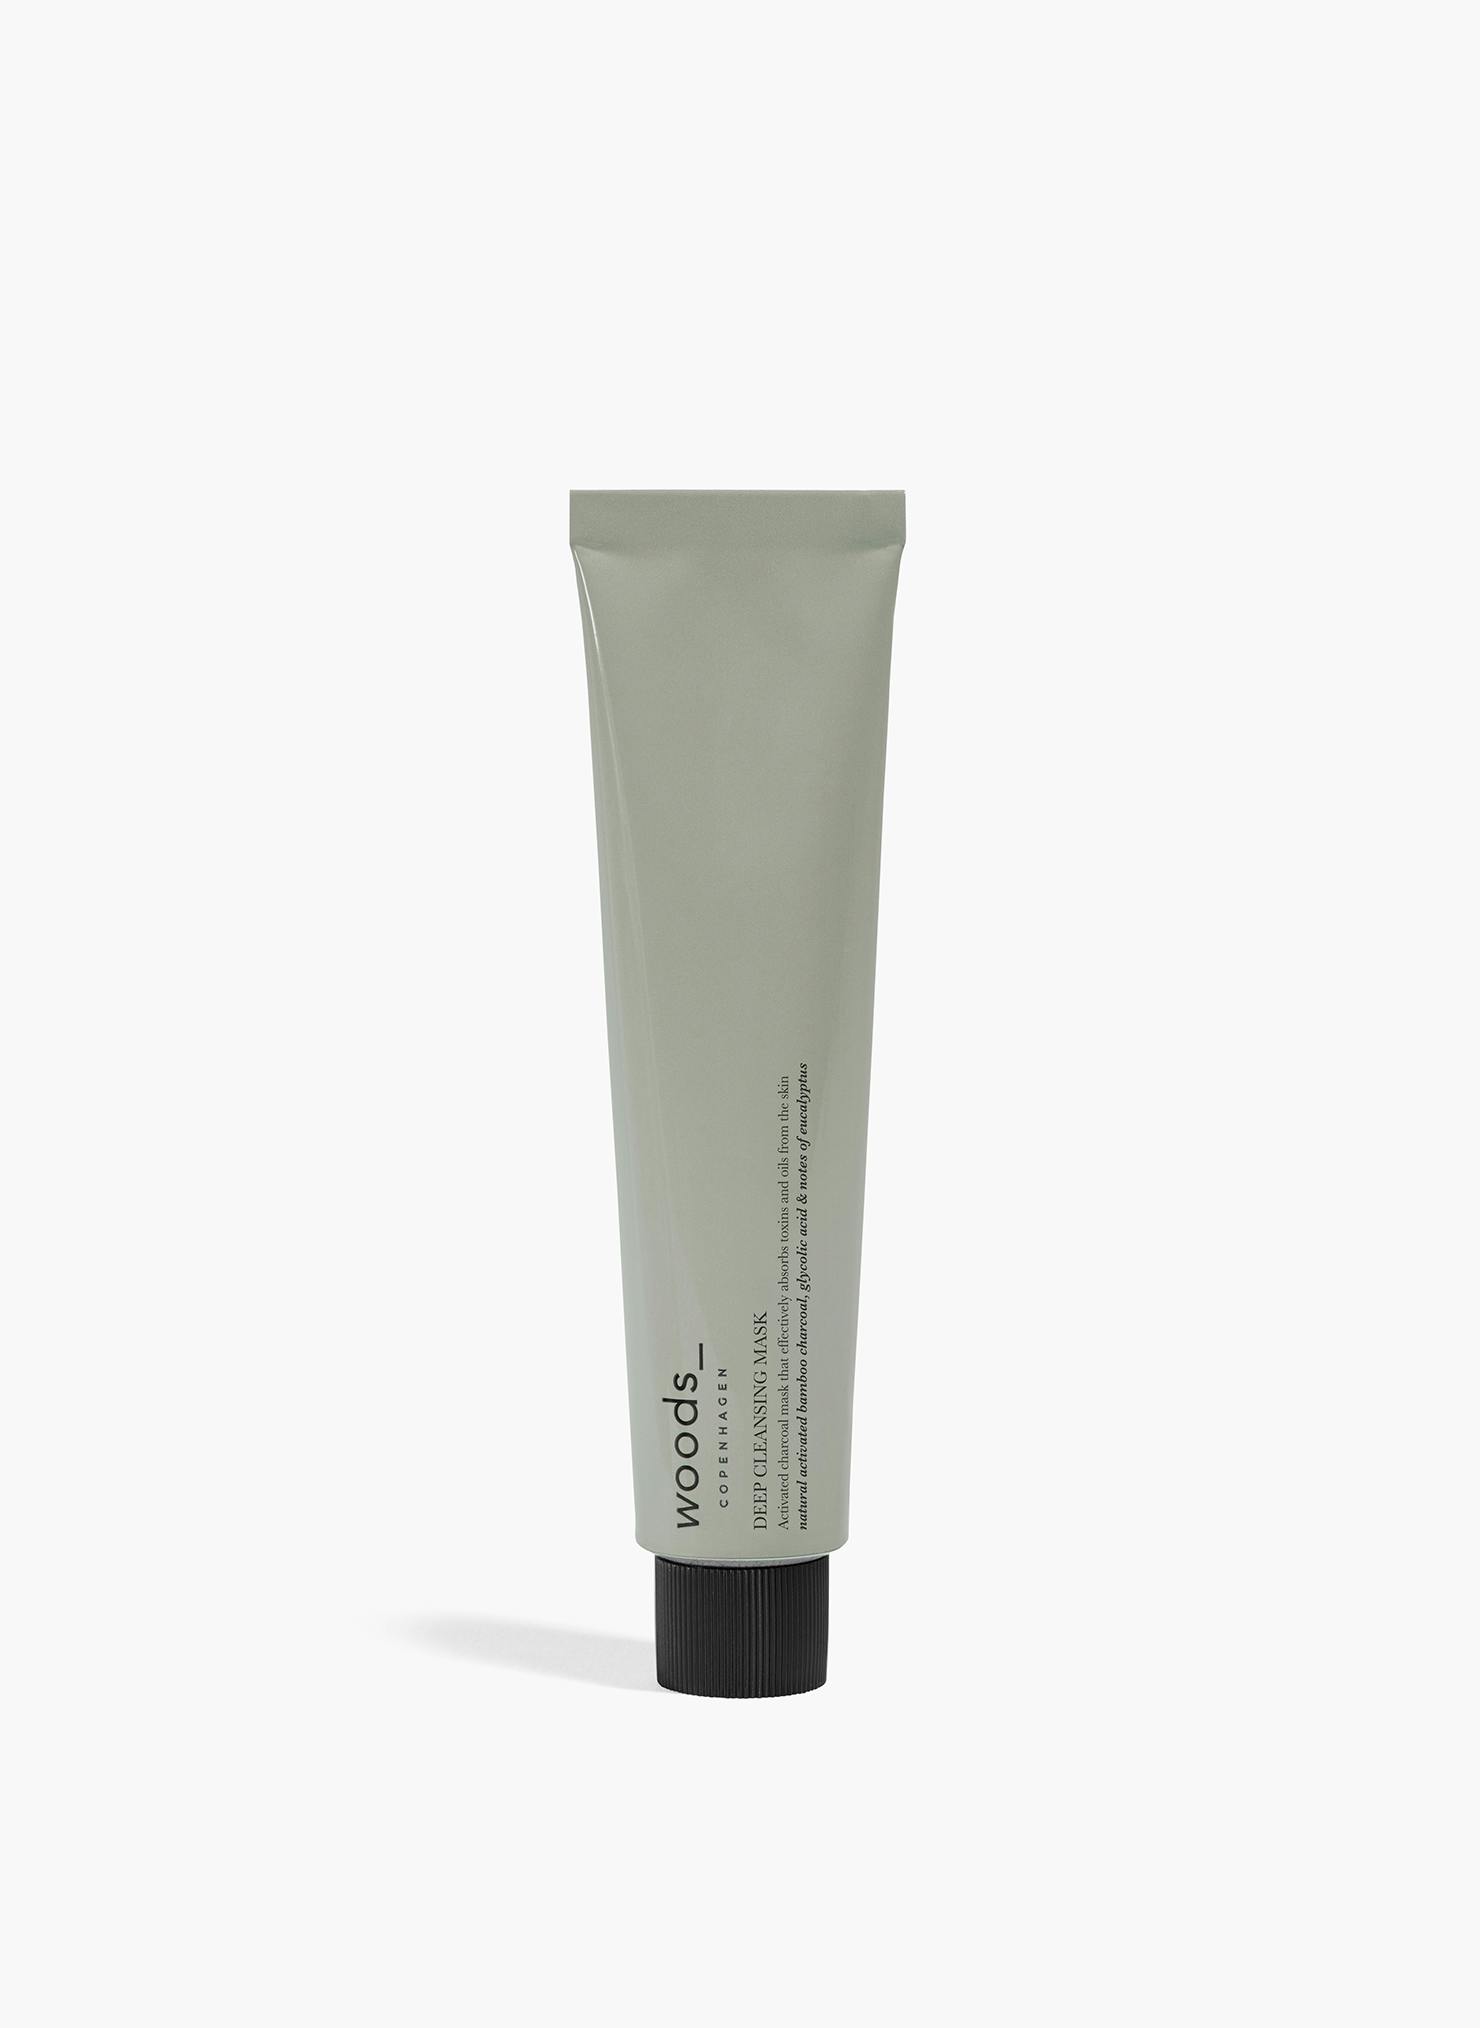 Stylish grey tube with an active charcoal mask for deep cleansing pot the skin, for men and women. Organic and natural.